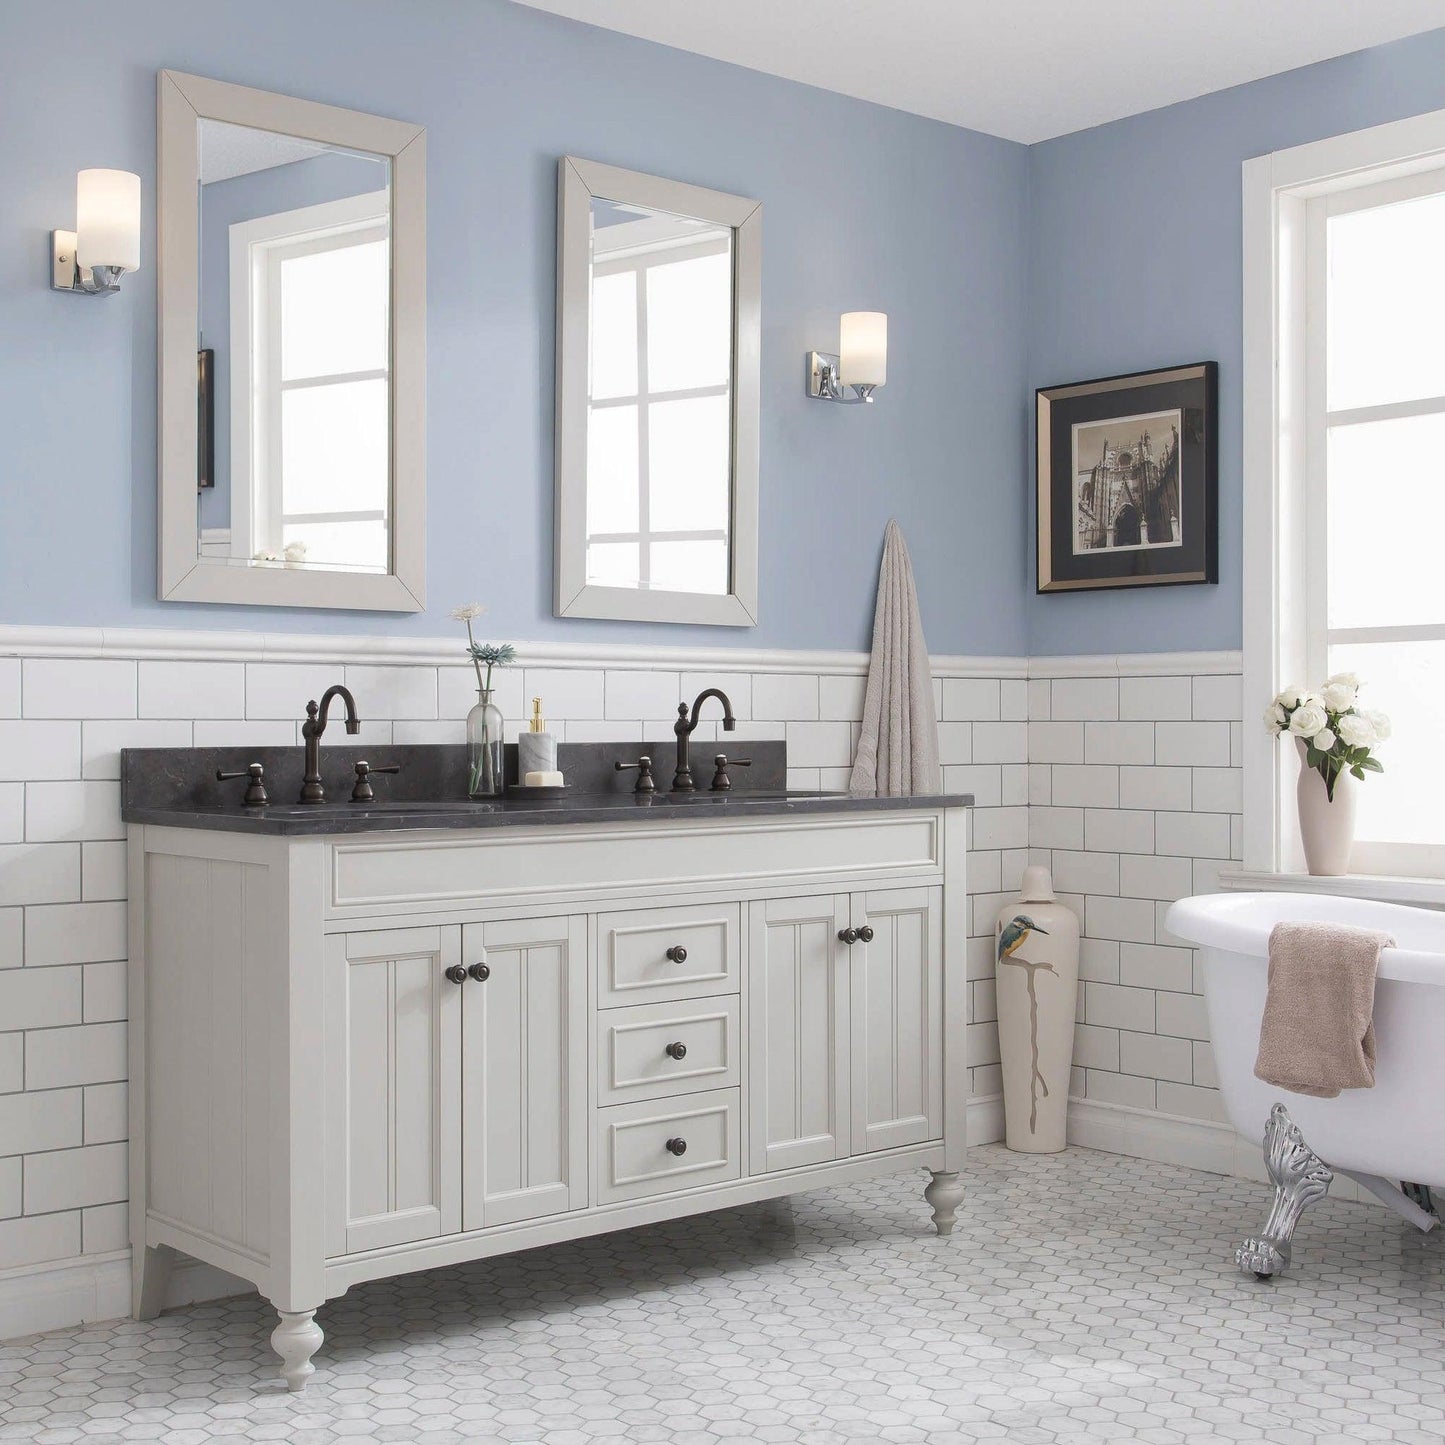 Water Creation Potenza 60" Bathroom Vanity in Earl Grey with Blue Limestone Top with Faucet